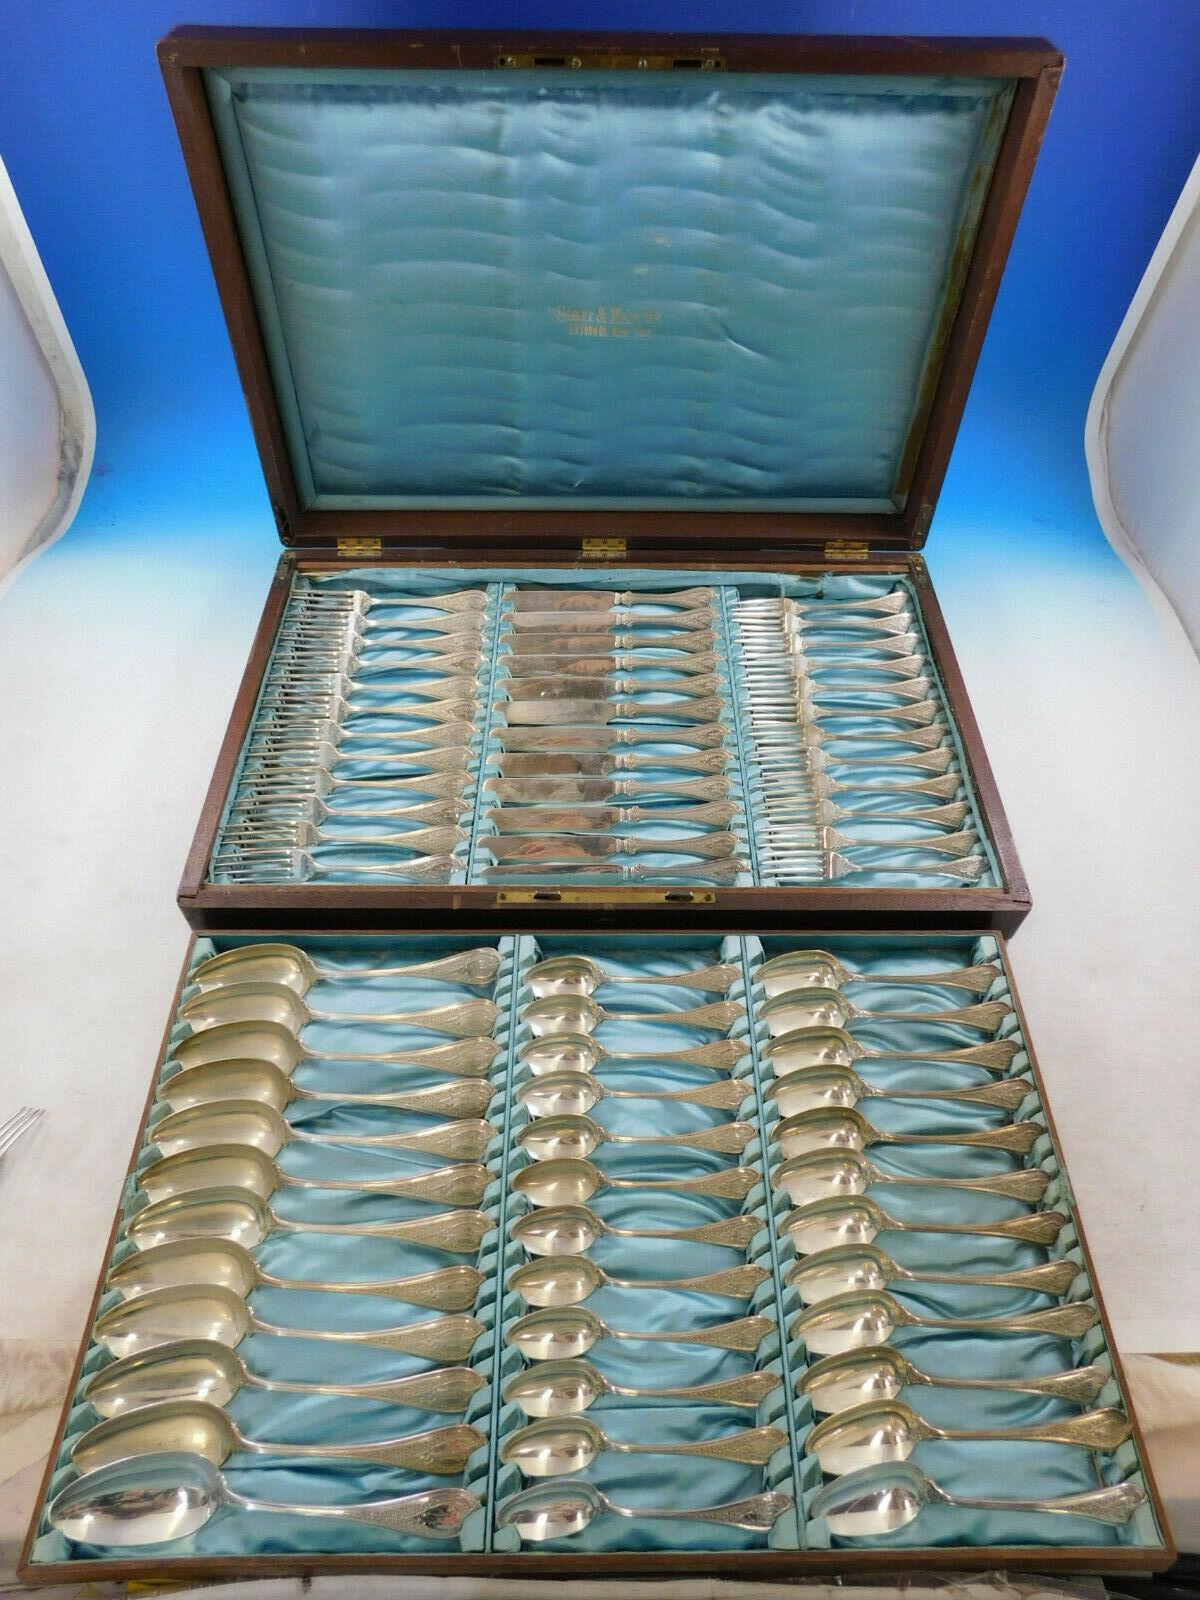 Rare Florentine by Wendt circa 1870 sterling silver Flatware set in fitted box - 72 pieces. This Moorish/Persian style features a background with a complex design of foliage-like scrollwork. This set includes:

12 Knives, flat handle all-sterling,